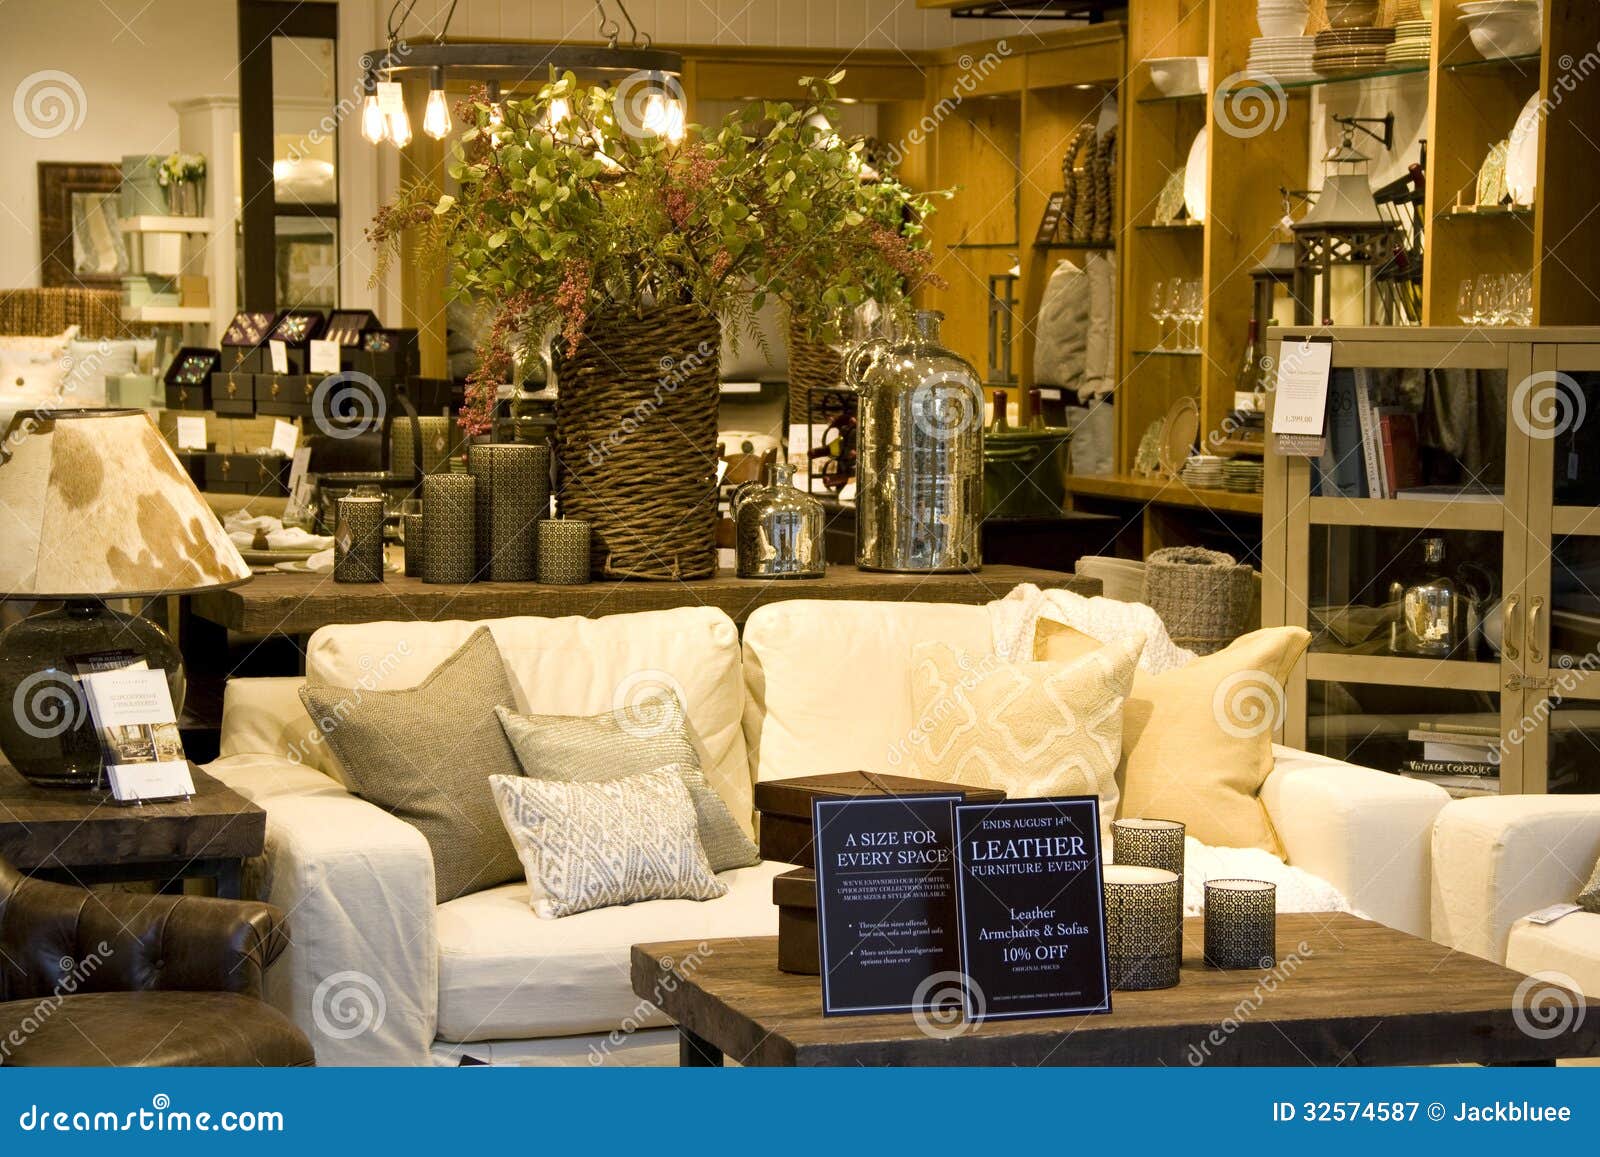 Furniture And Home Decor Stores